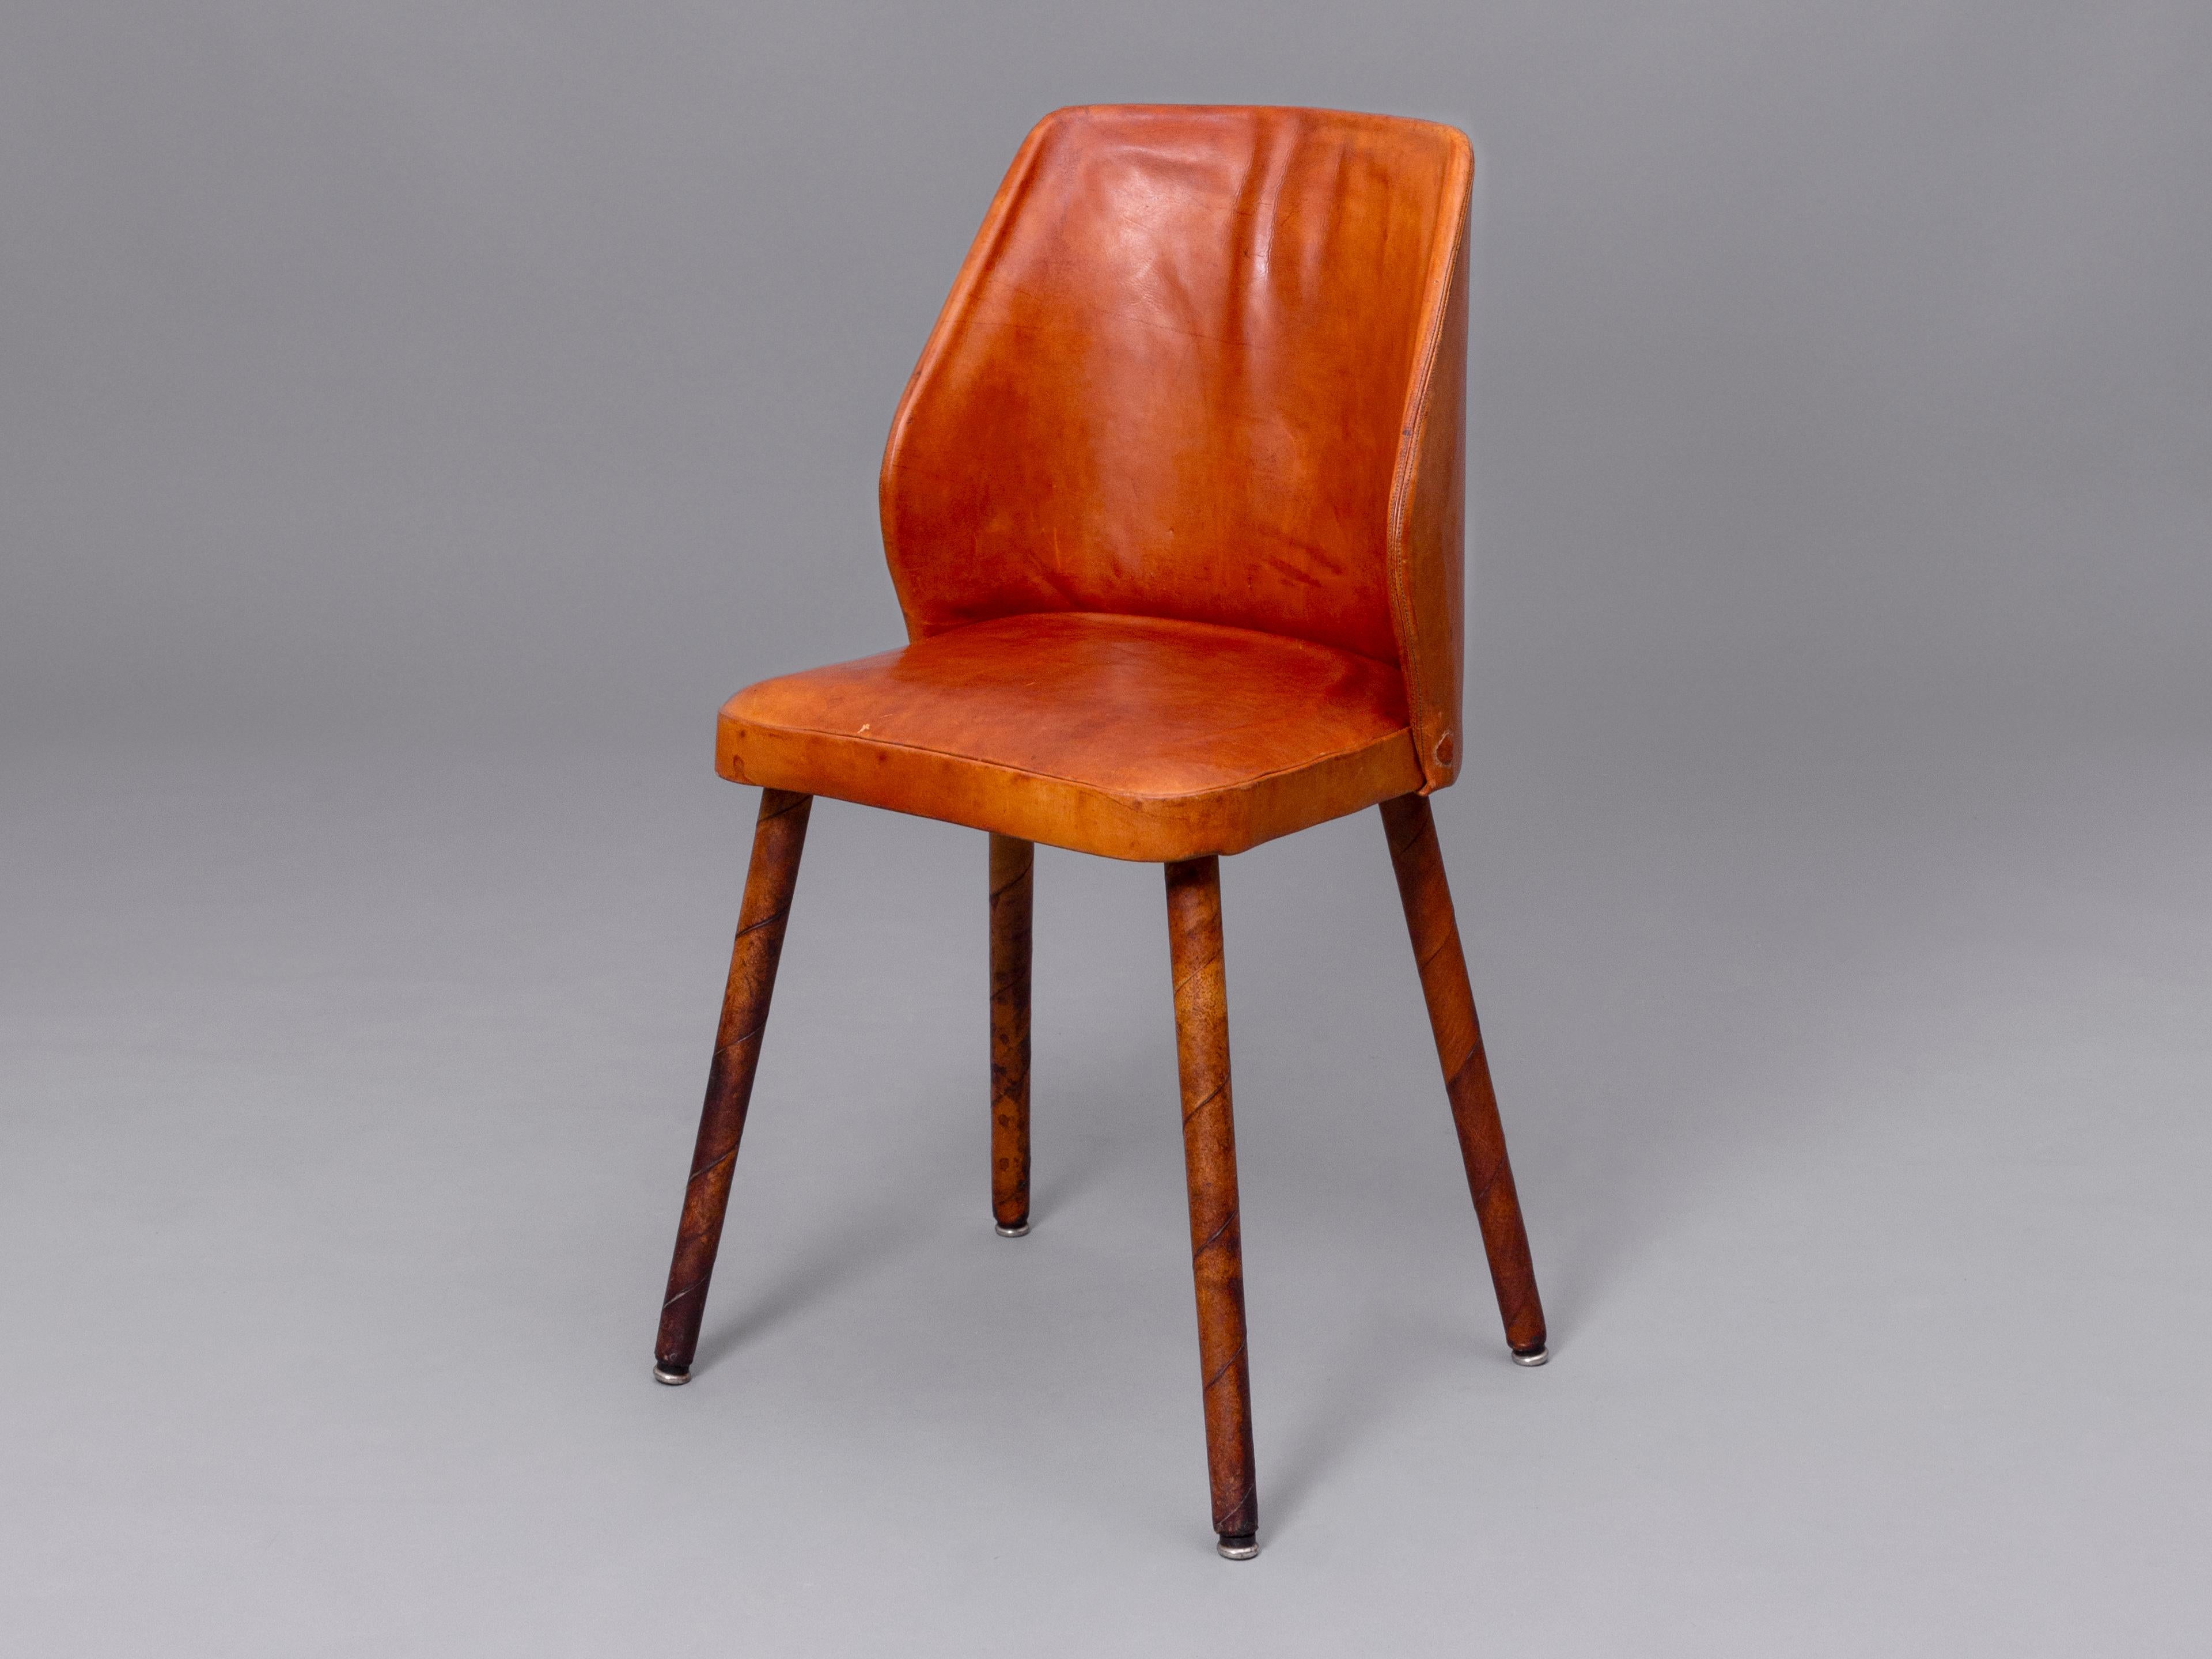 Original sixties chair featuring a wooden frame covered in leather with original patina made by Sino, Denmark, 1960s.
This rare chair was conceived in the mid century modern style context, it has refined proportions and lacks of any excessive